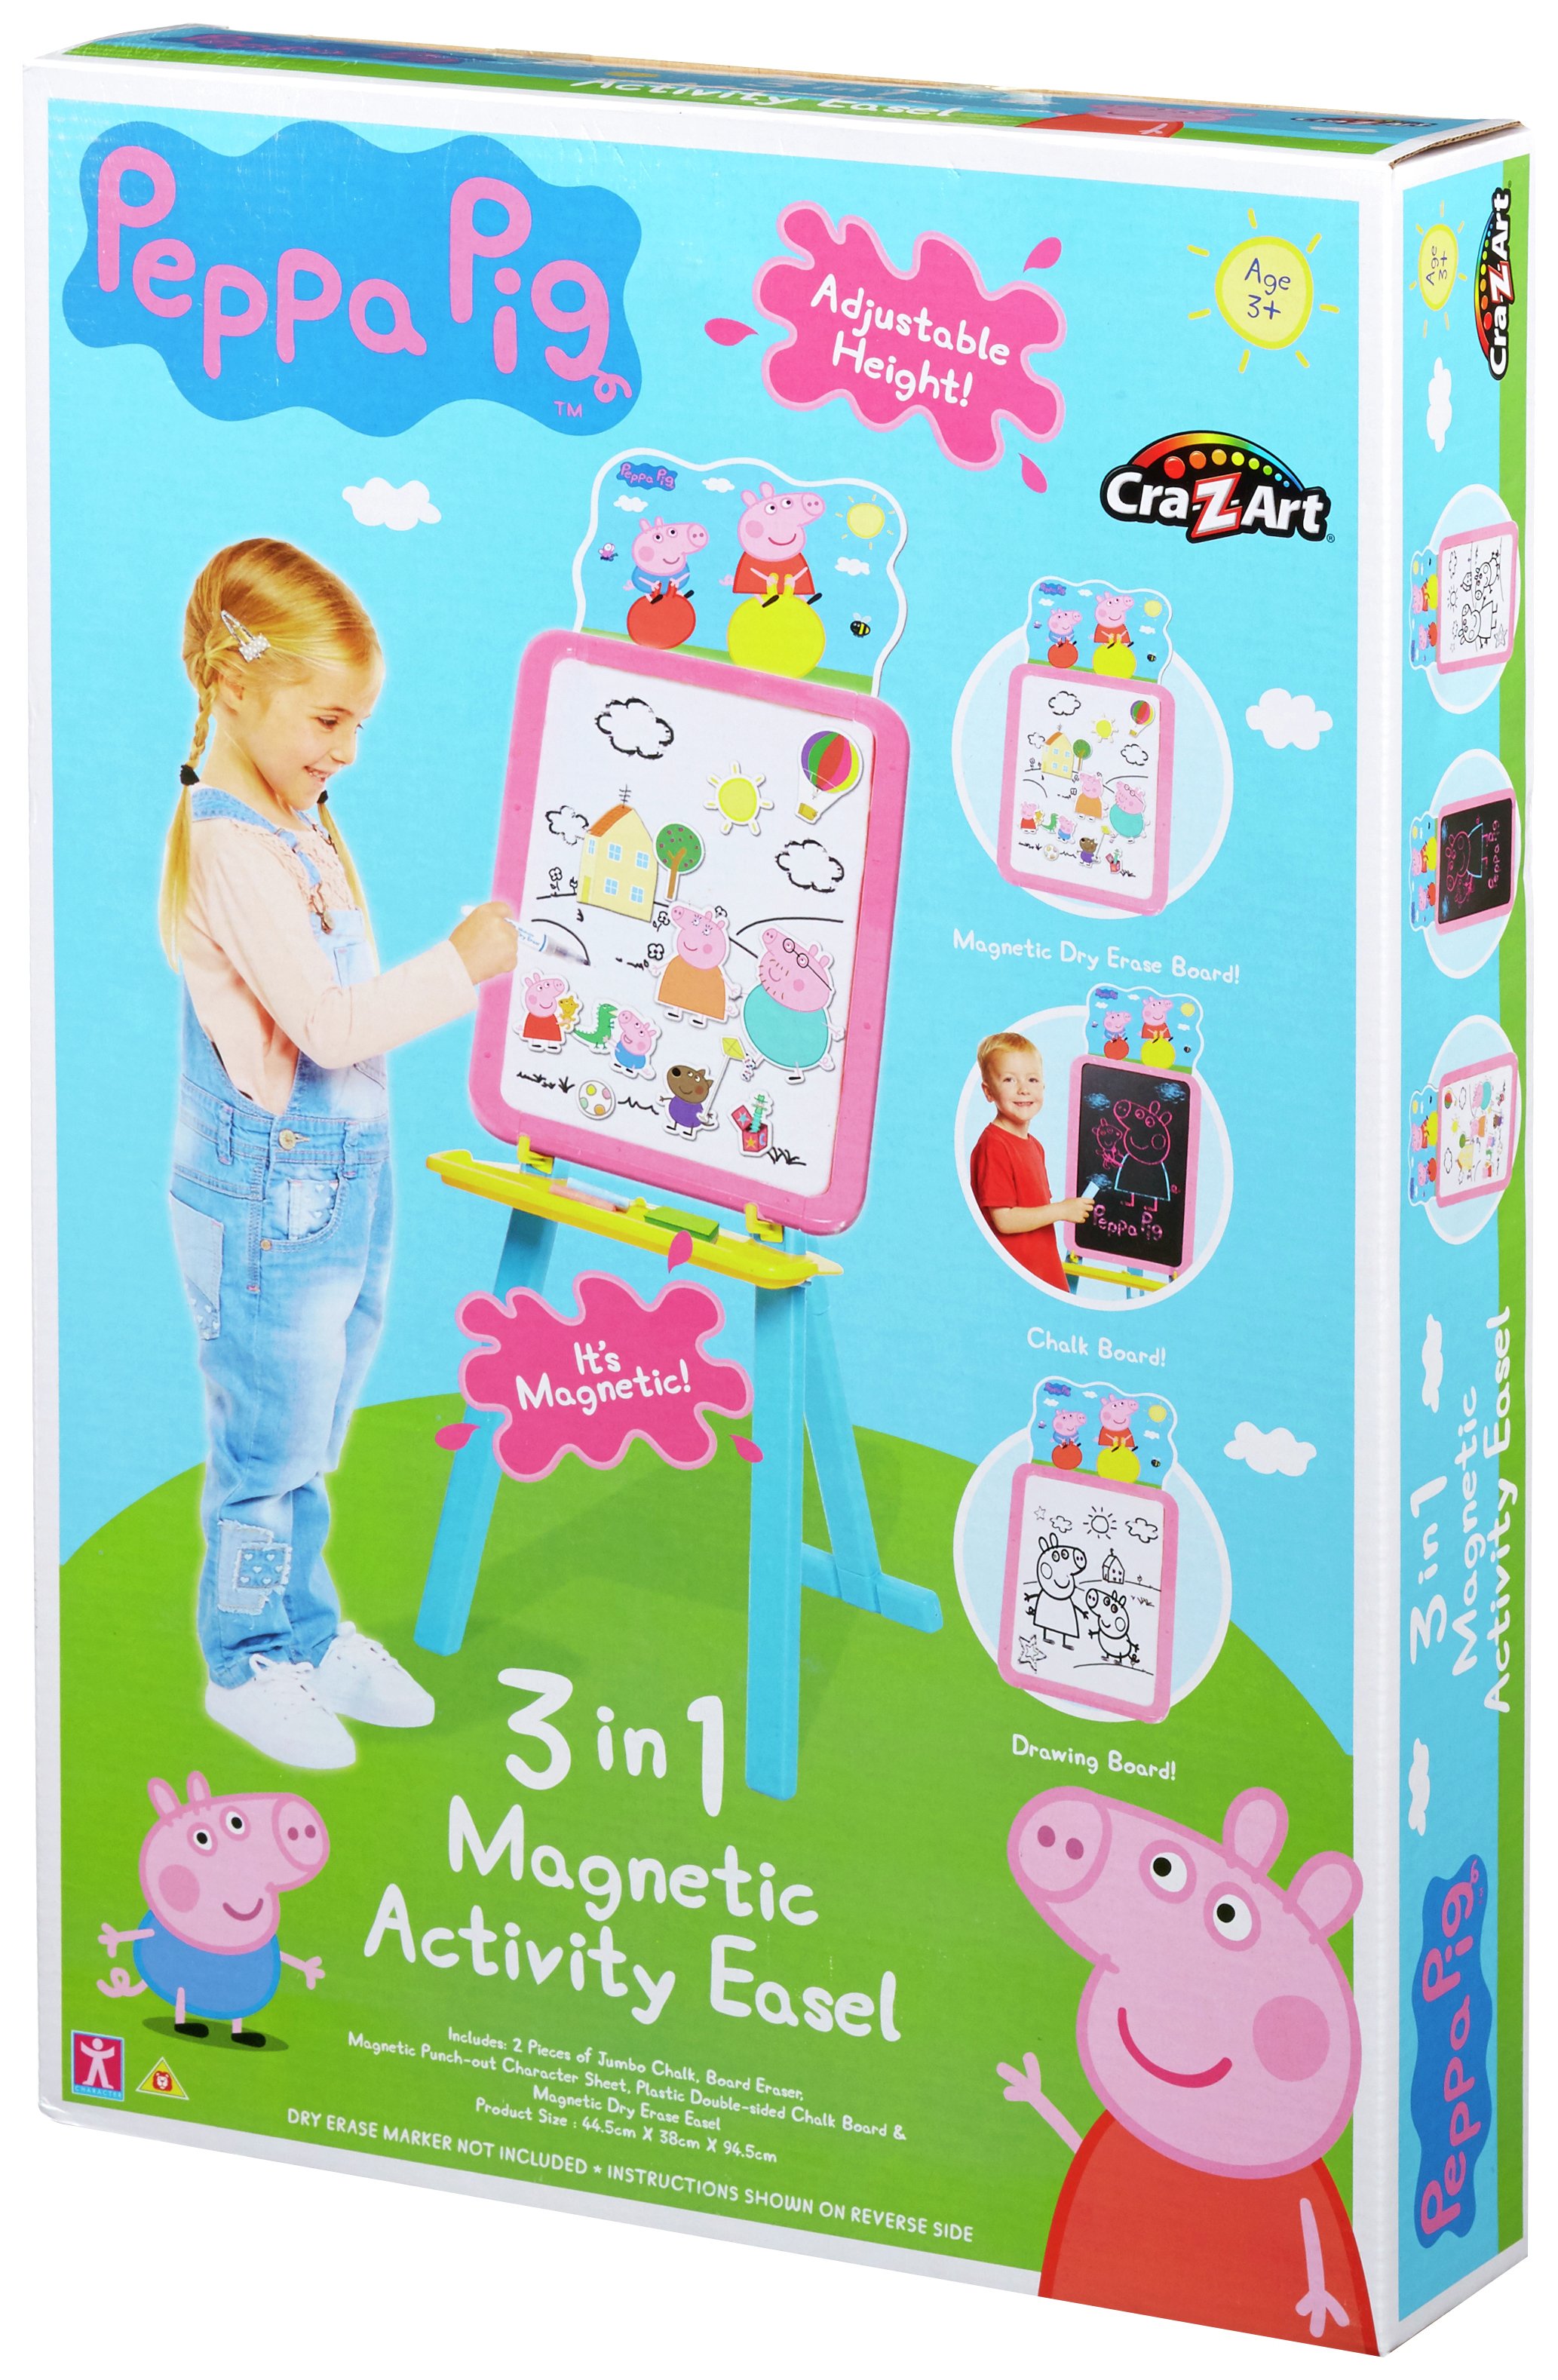 Peppa Pig Deluxe Easel Playset Review